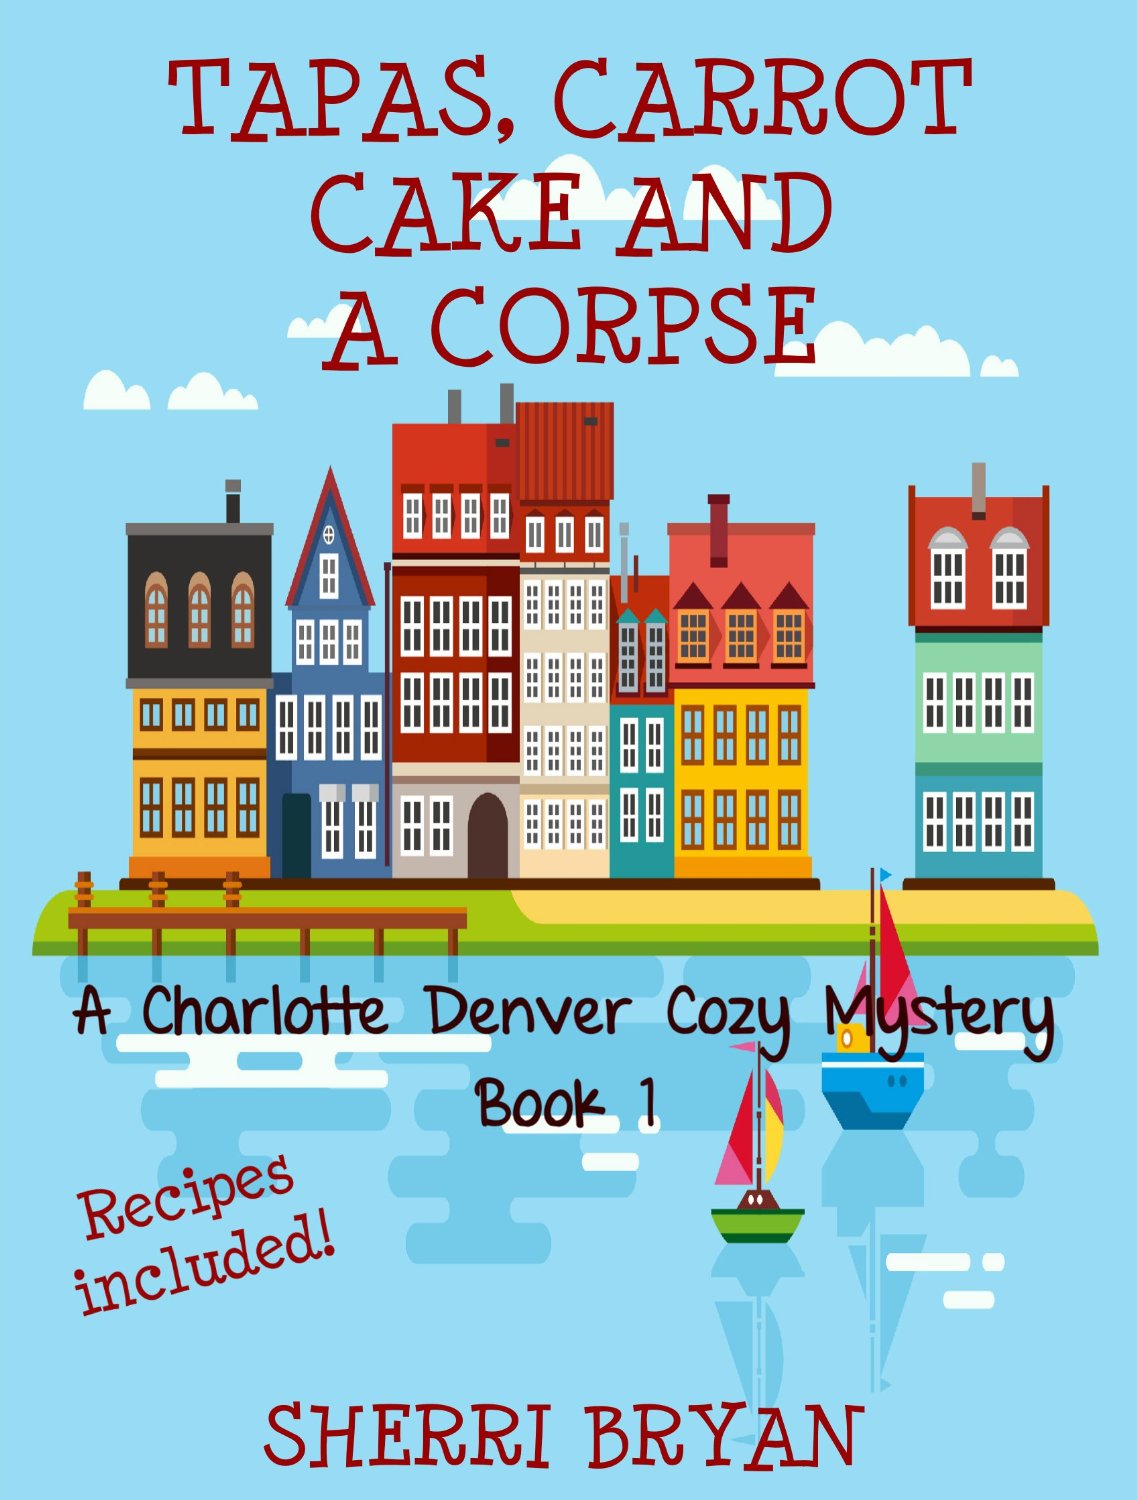 Tapas, Carrot Cake and a Corpse (A Charlotte Denver Cozy Mystery Book 1) by Sherri Bryan